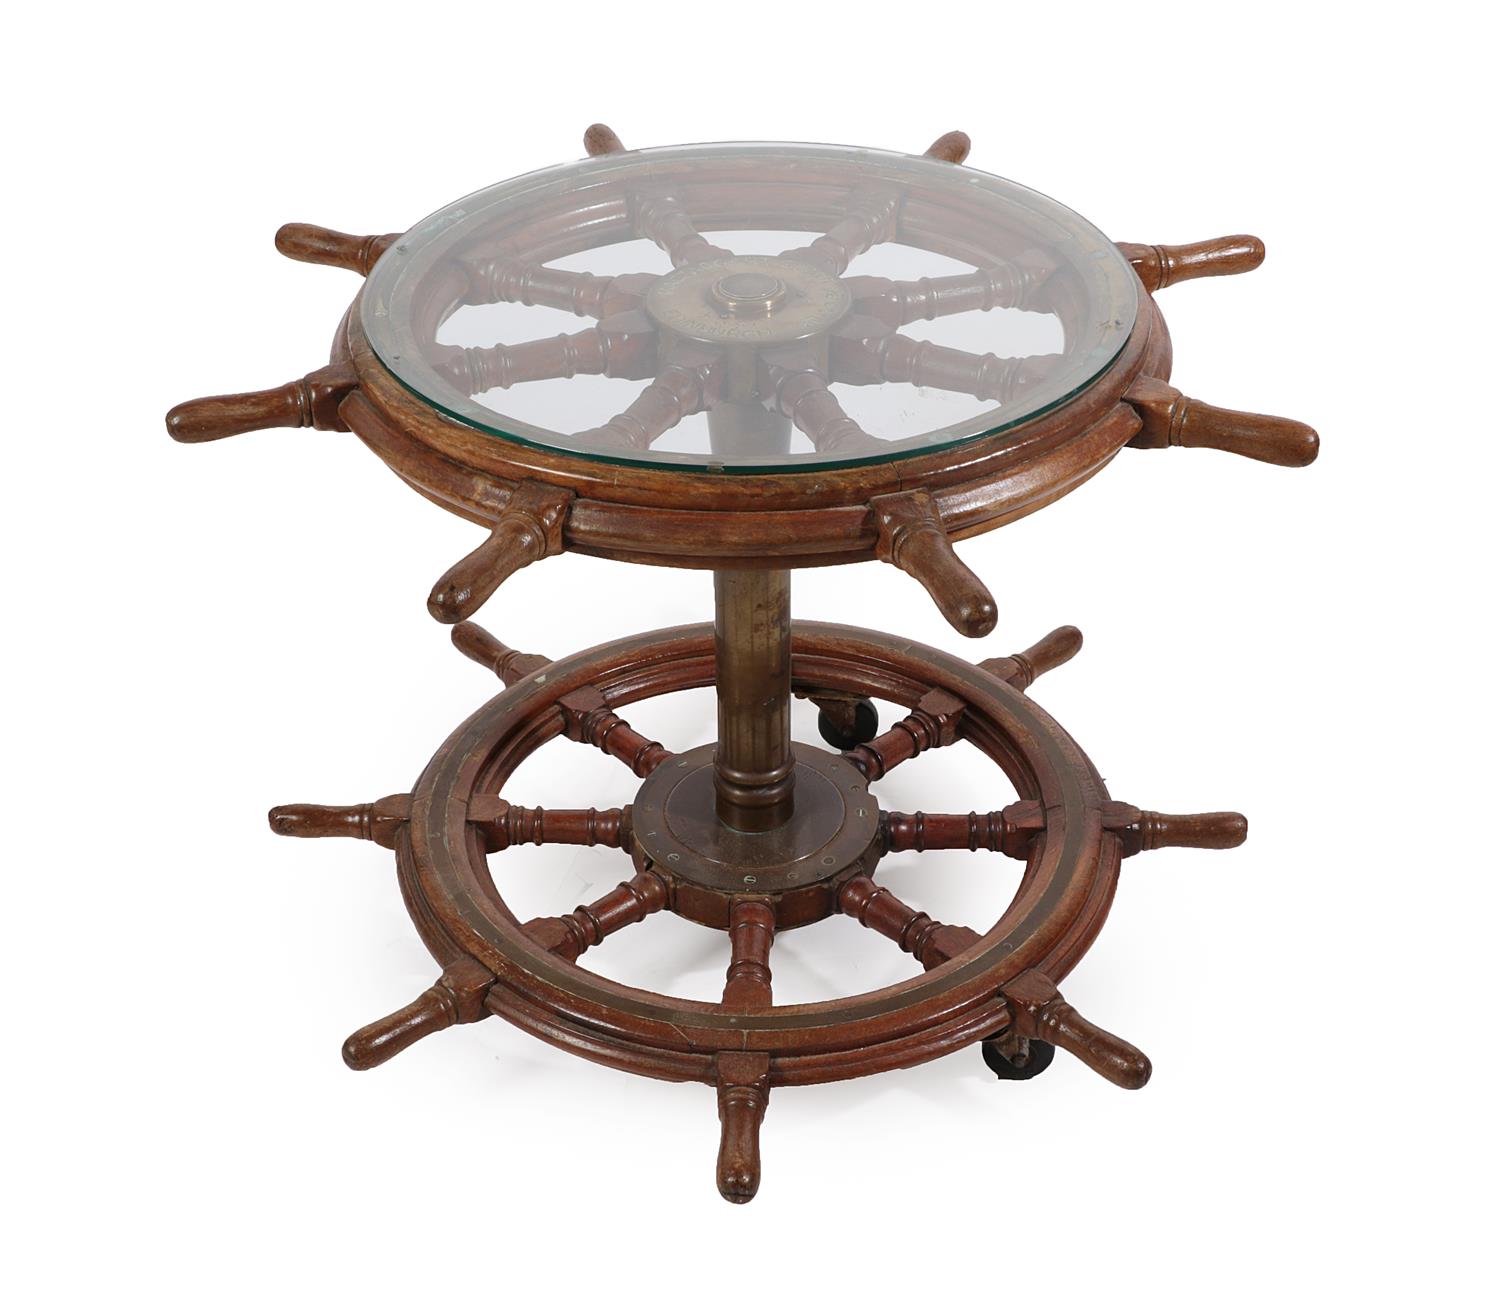 Lot 157 - A Ship's Helm Table, with circular glass top, constructed from two helms on a brass column support